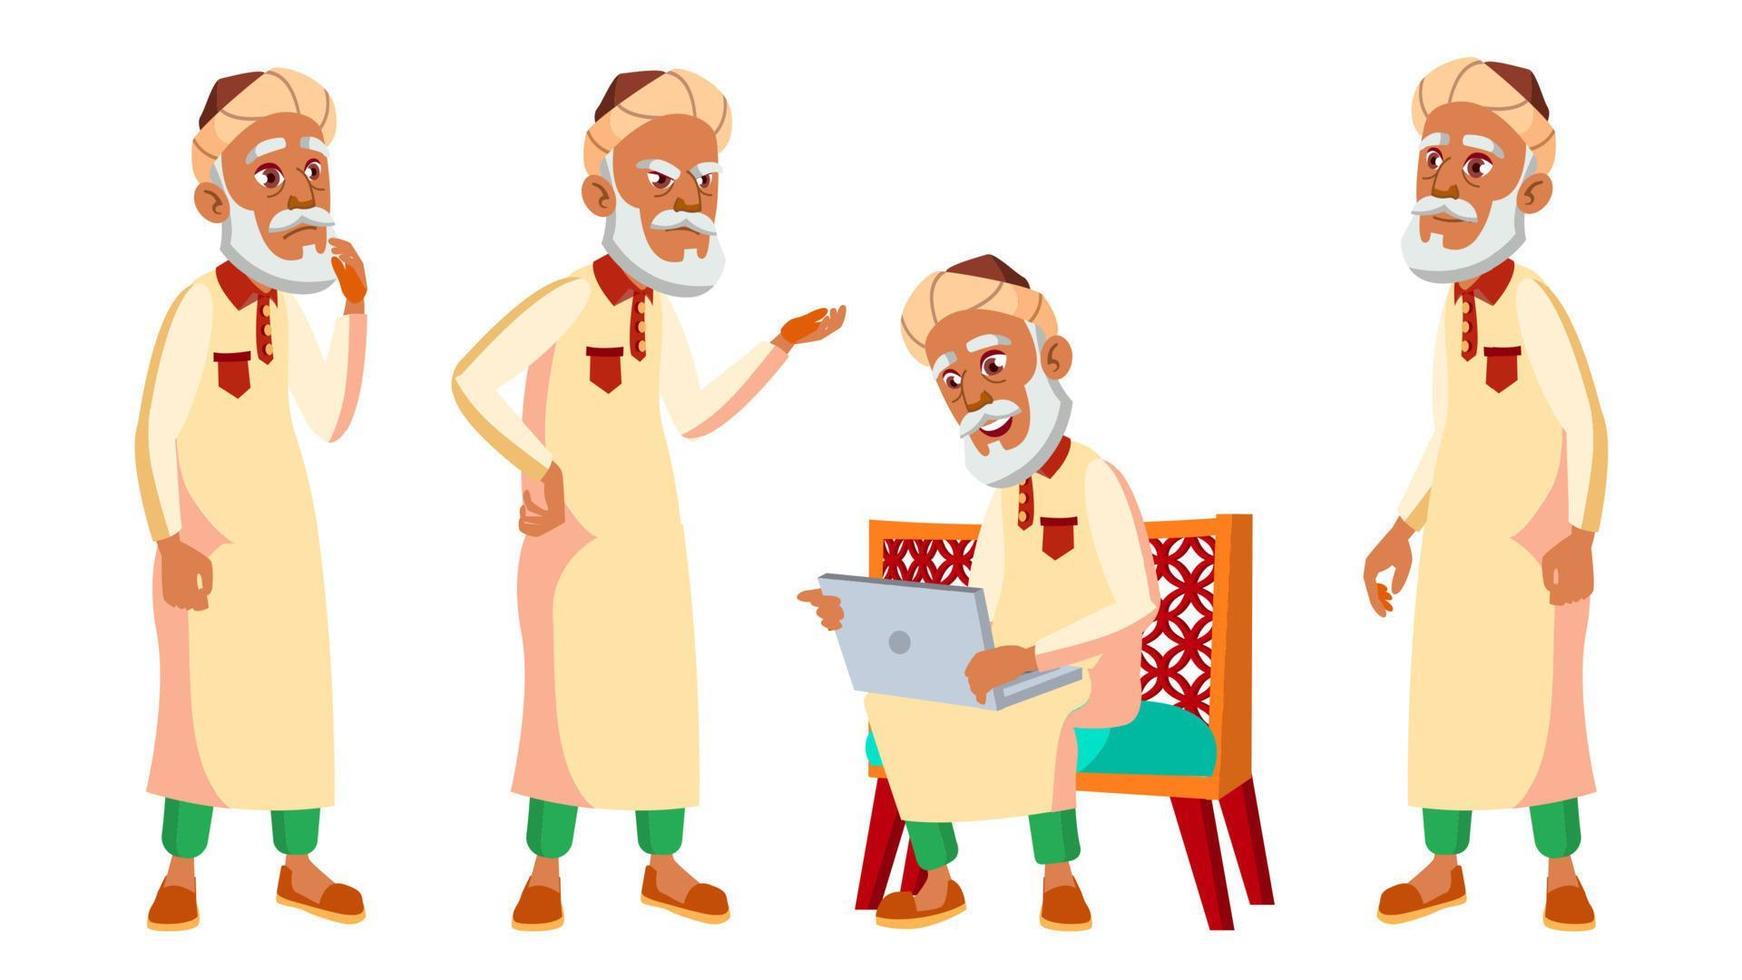 Arab, Muslim Old Man Poses Set Vector. Elderly People. Senior Person. Aged. Funny Pensioner. Leisure. Postcard, Announcement, Cover Design. Isolated Cartoon Illustration vector